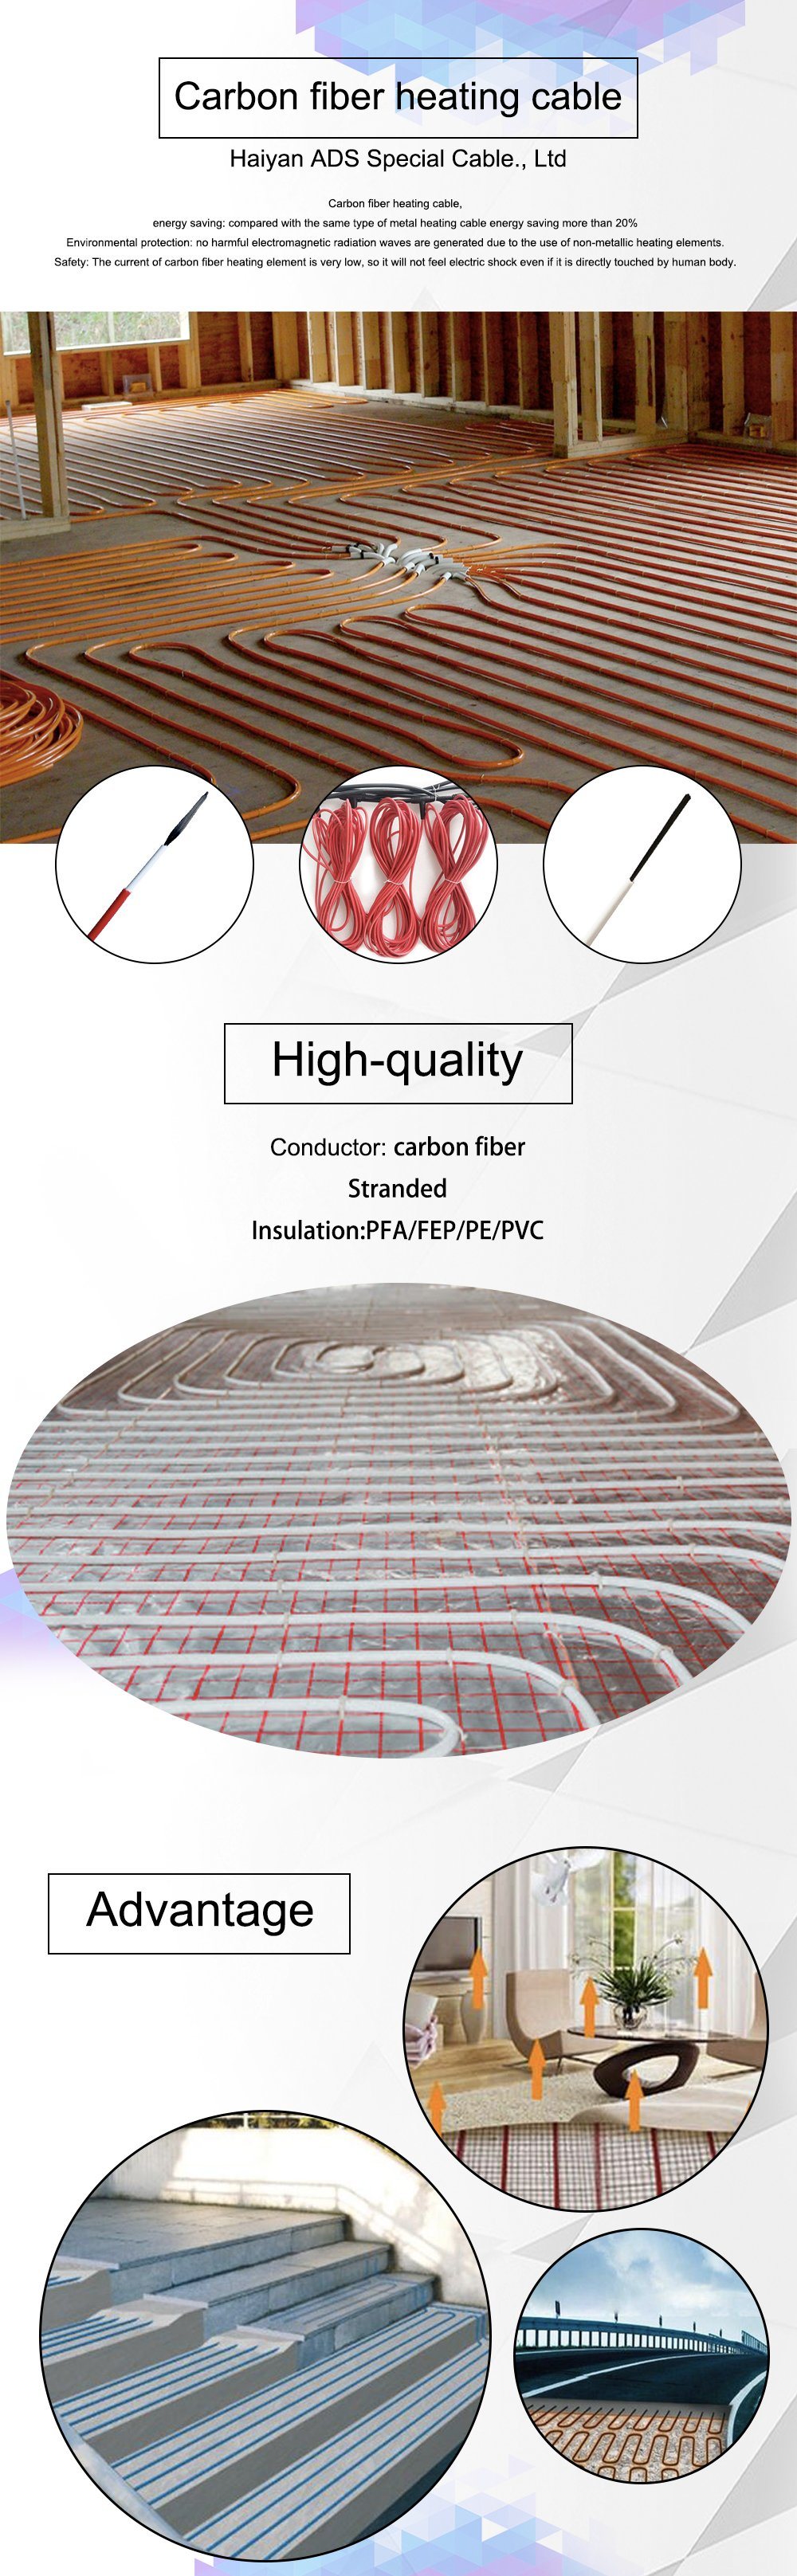 12K FEP Insulated Carbon Fiber Heating Cable for Underfloor Heating